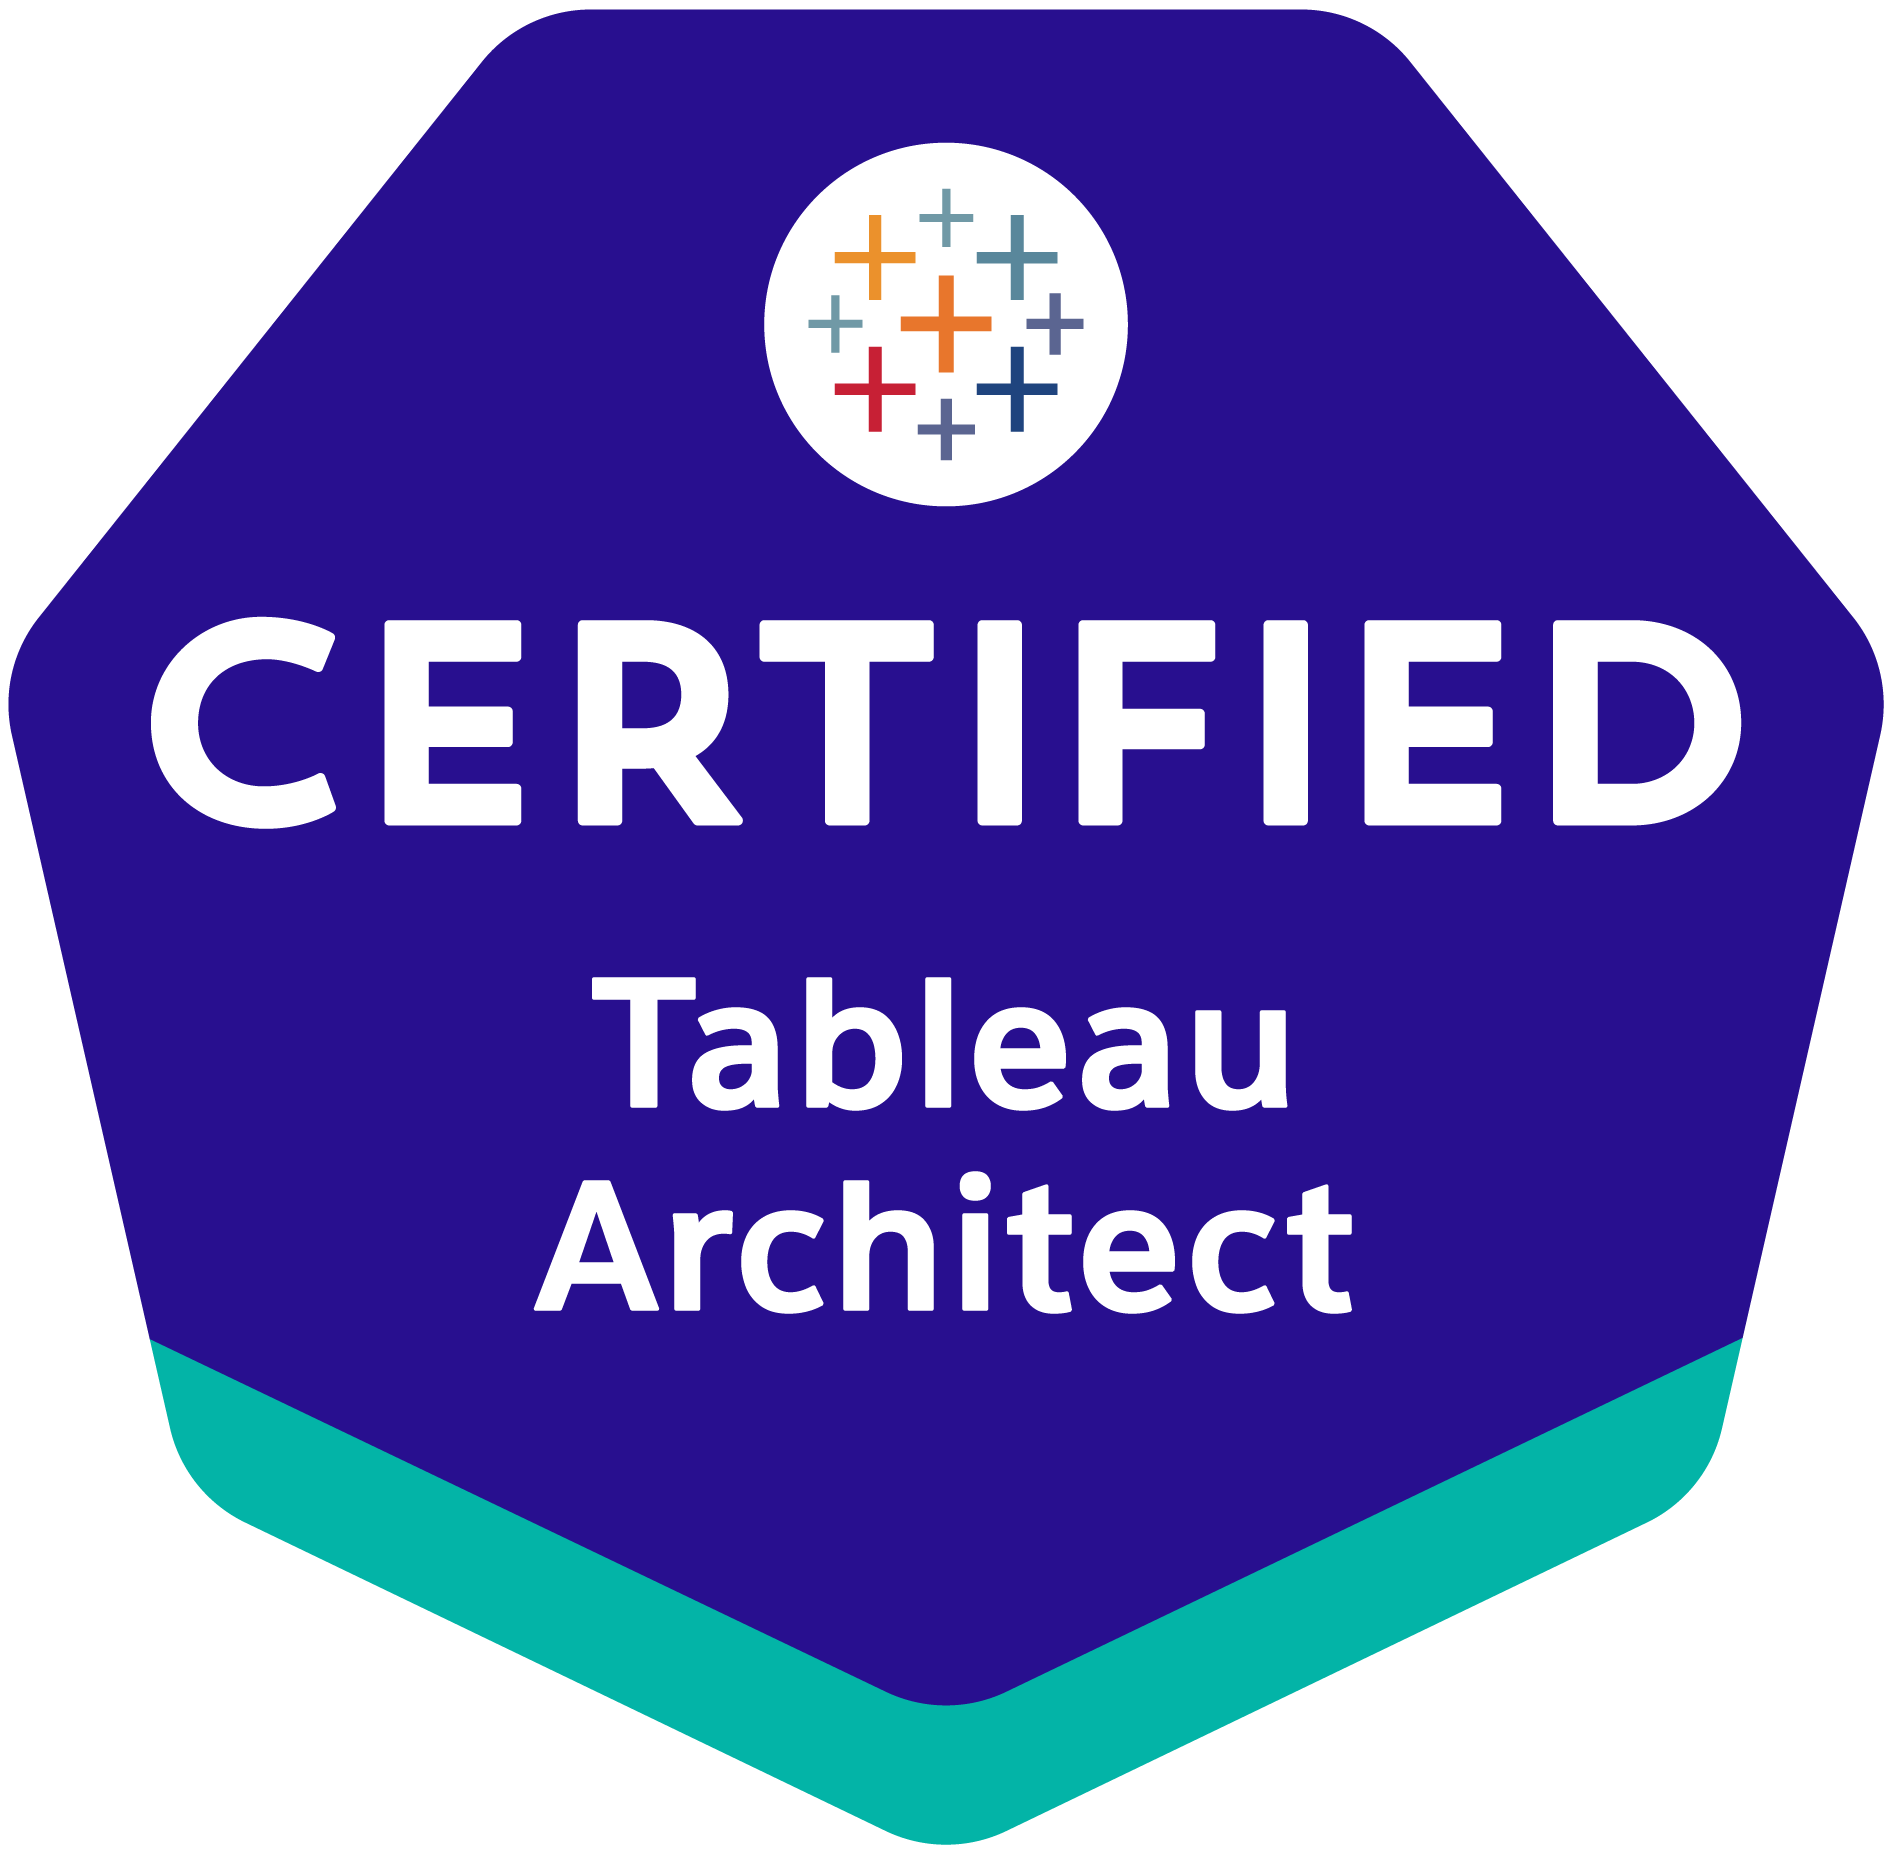  The Tableau Certified Architect Certification